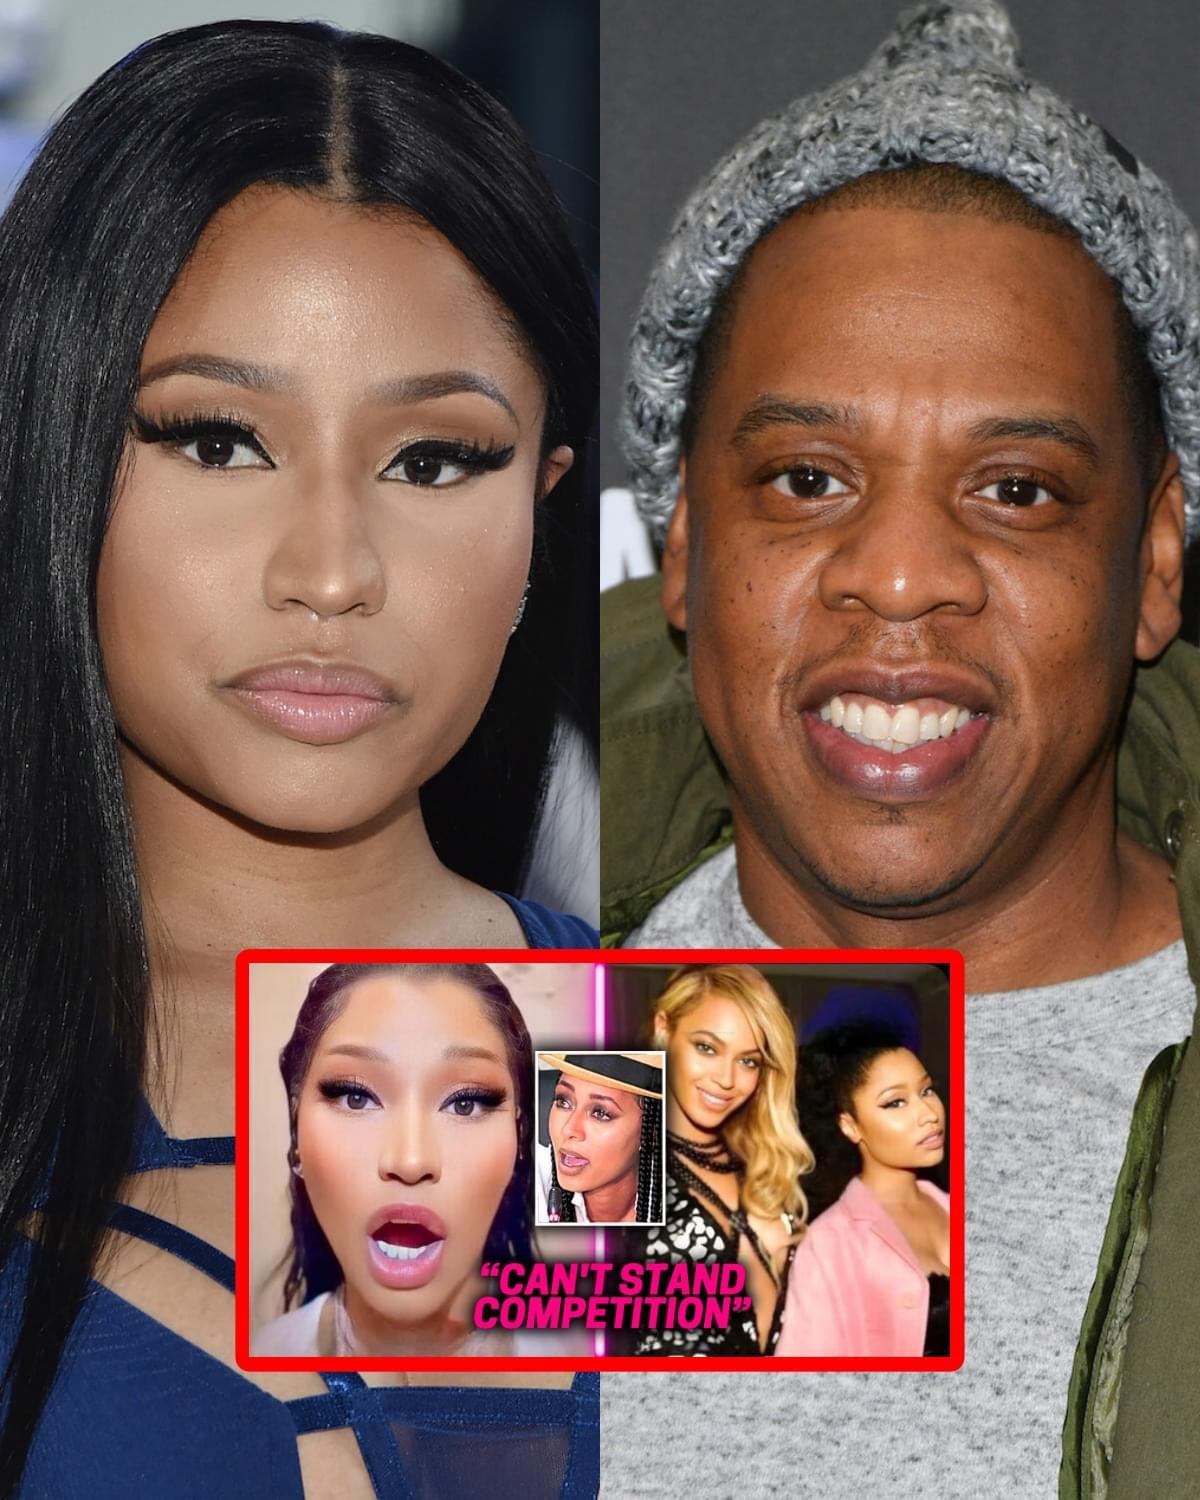 Nicki Minaj CALLS OUT Beyonce & Jay Z For K!lling Her Career Like Keri Hilson: Jay knows without money, nobody would want him